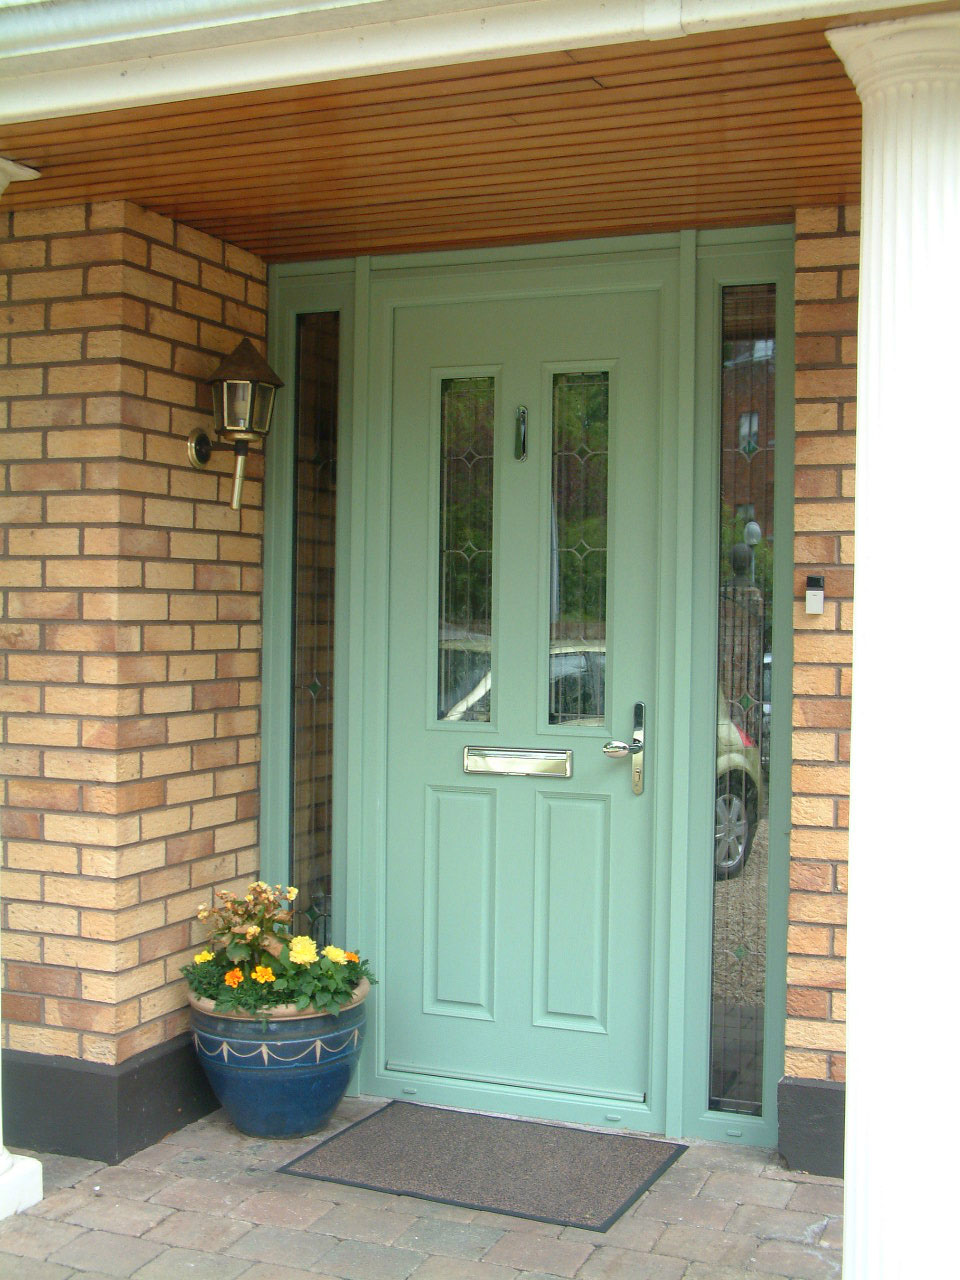 CHARTWELL GREEN APEER APM2 COMPOSITE FRONT DOOR FITTED BY ASGARD WINDOWS IN DUBLIN.